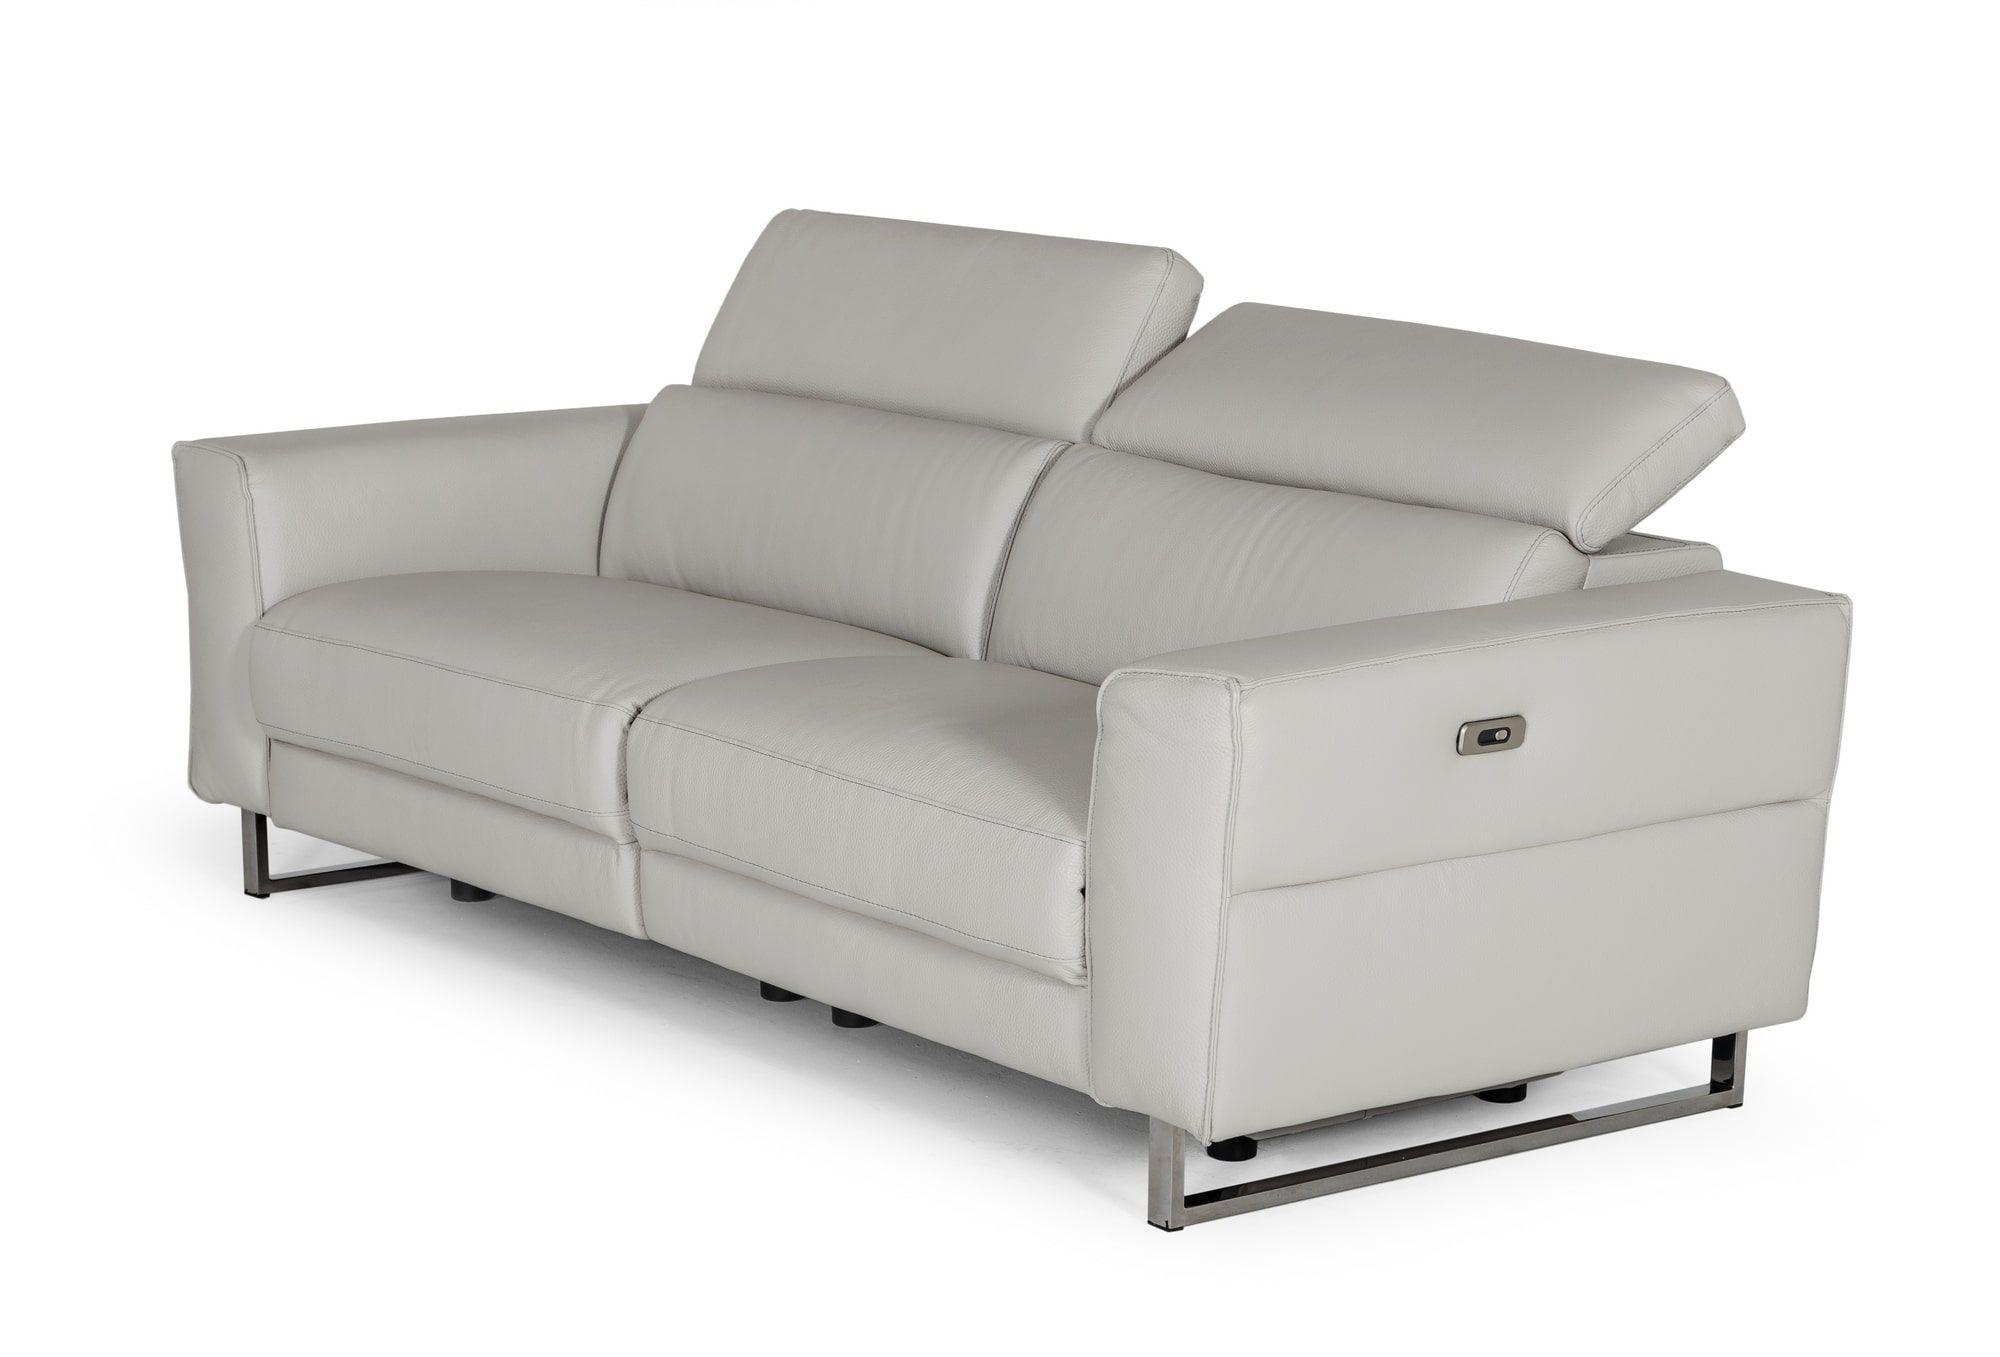 Contemporary, Modern Recliner Sofa VGDDLUCCA-GREY-S VGDDLUCCA-GREY-S in Gray Genuine Leather